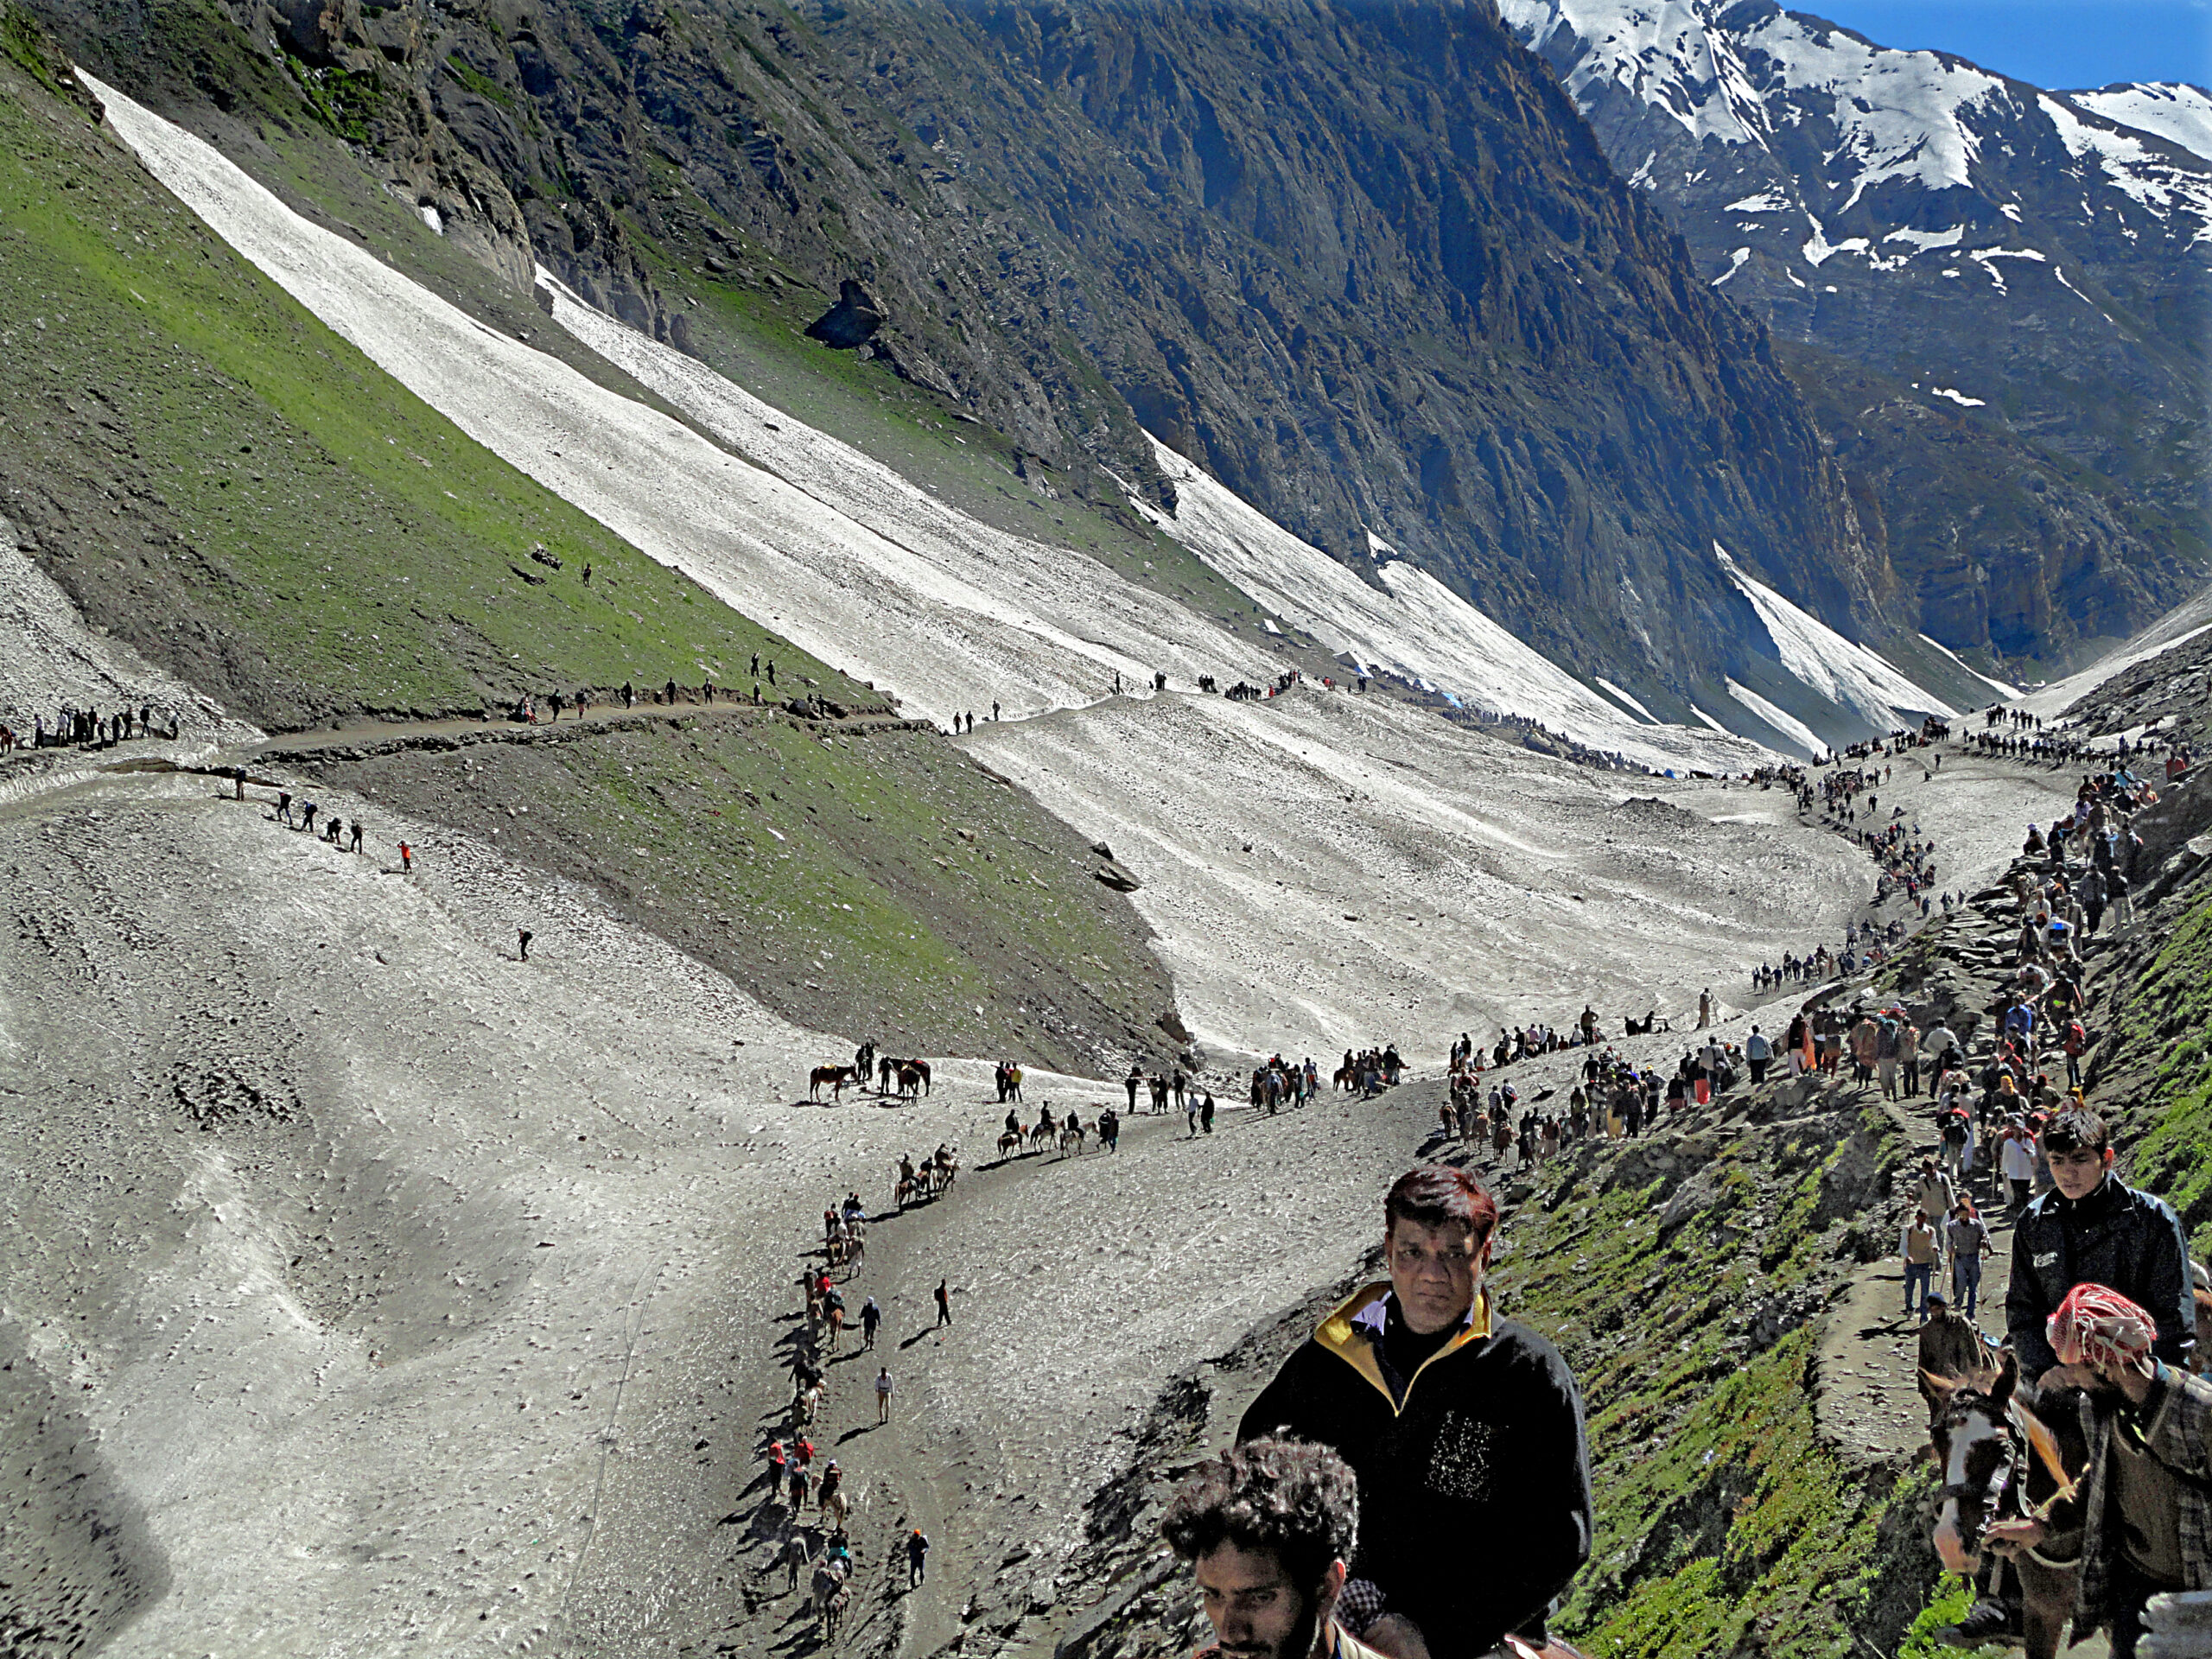 A busy mountainous path with numerous people walking and on horseback amidst snowy and green slopes.